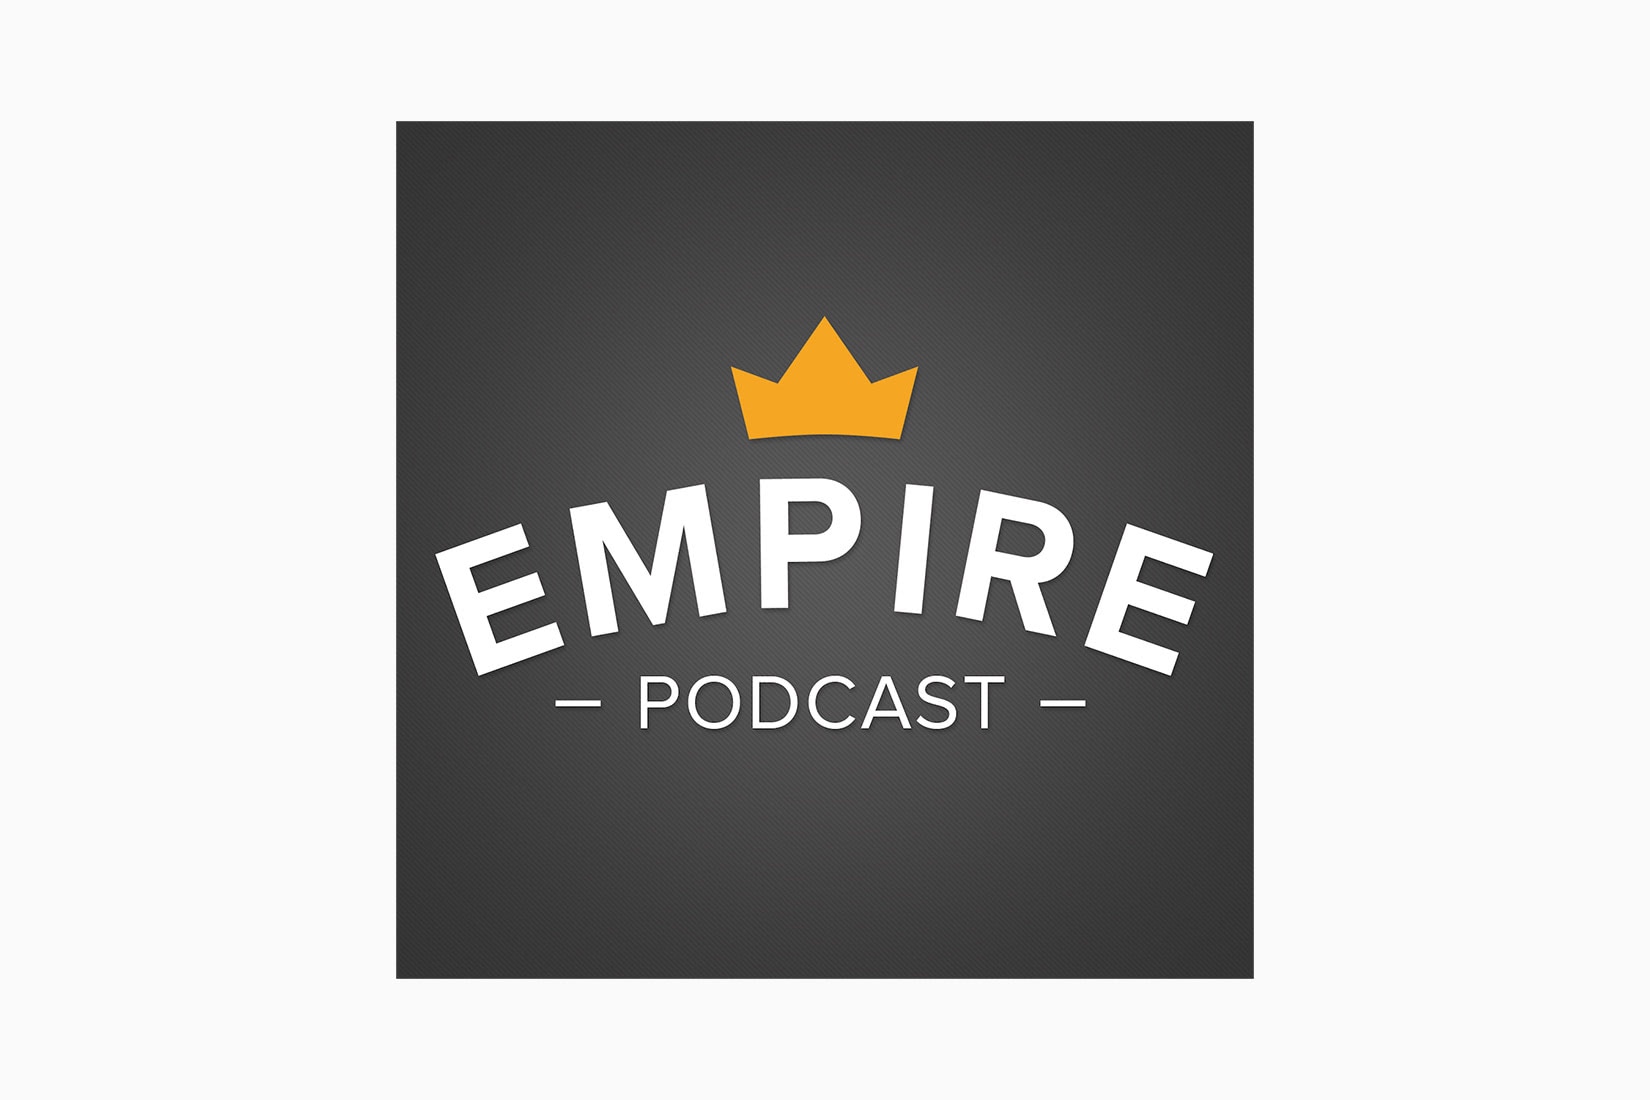 meilleurs podcasts empire flippers podcast luxe digital